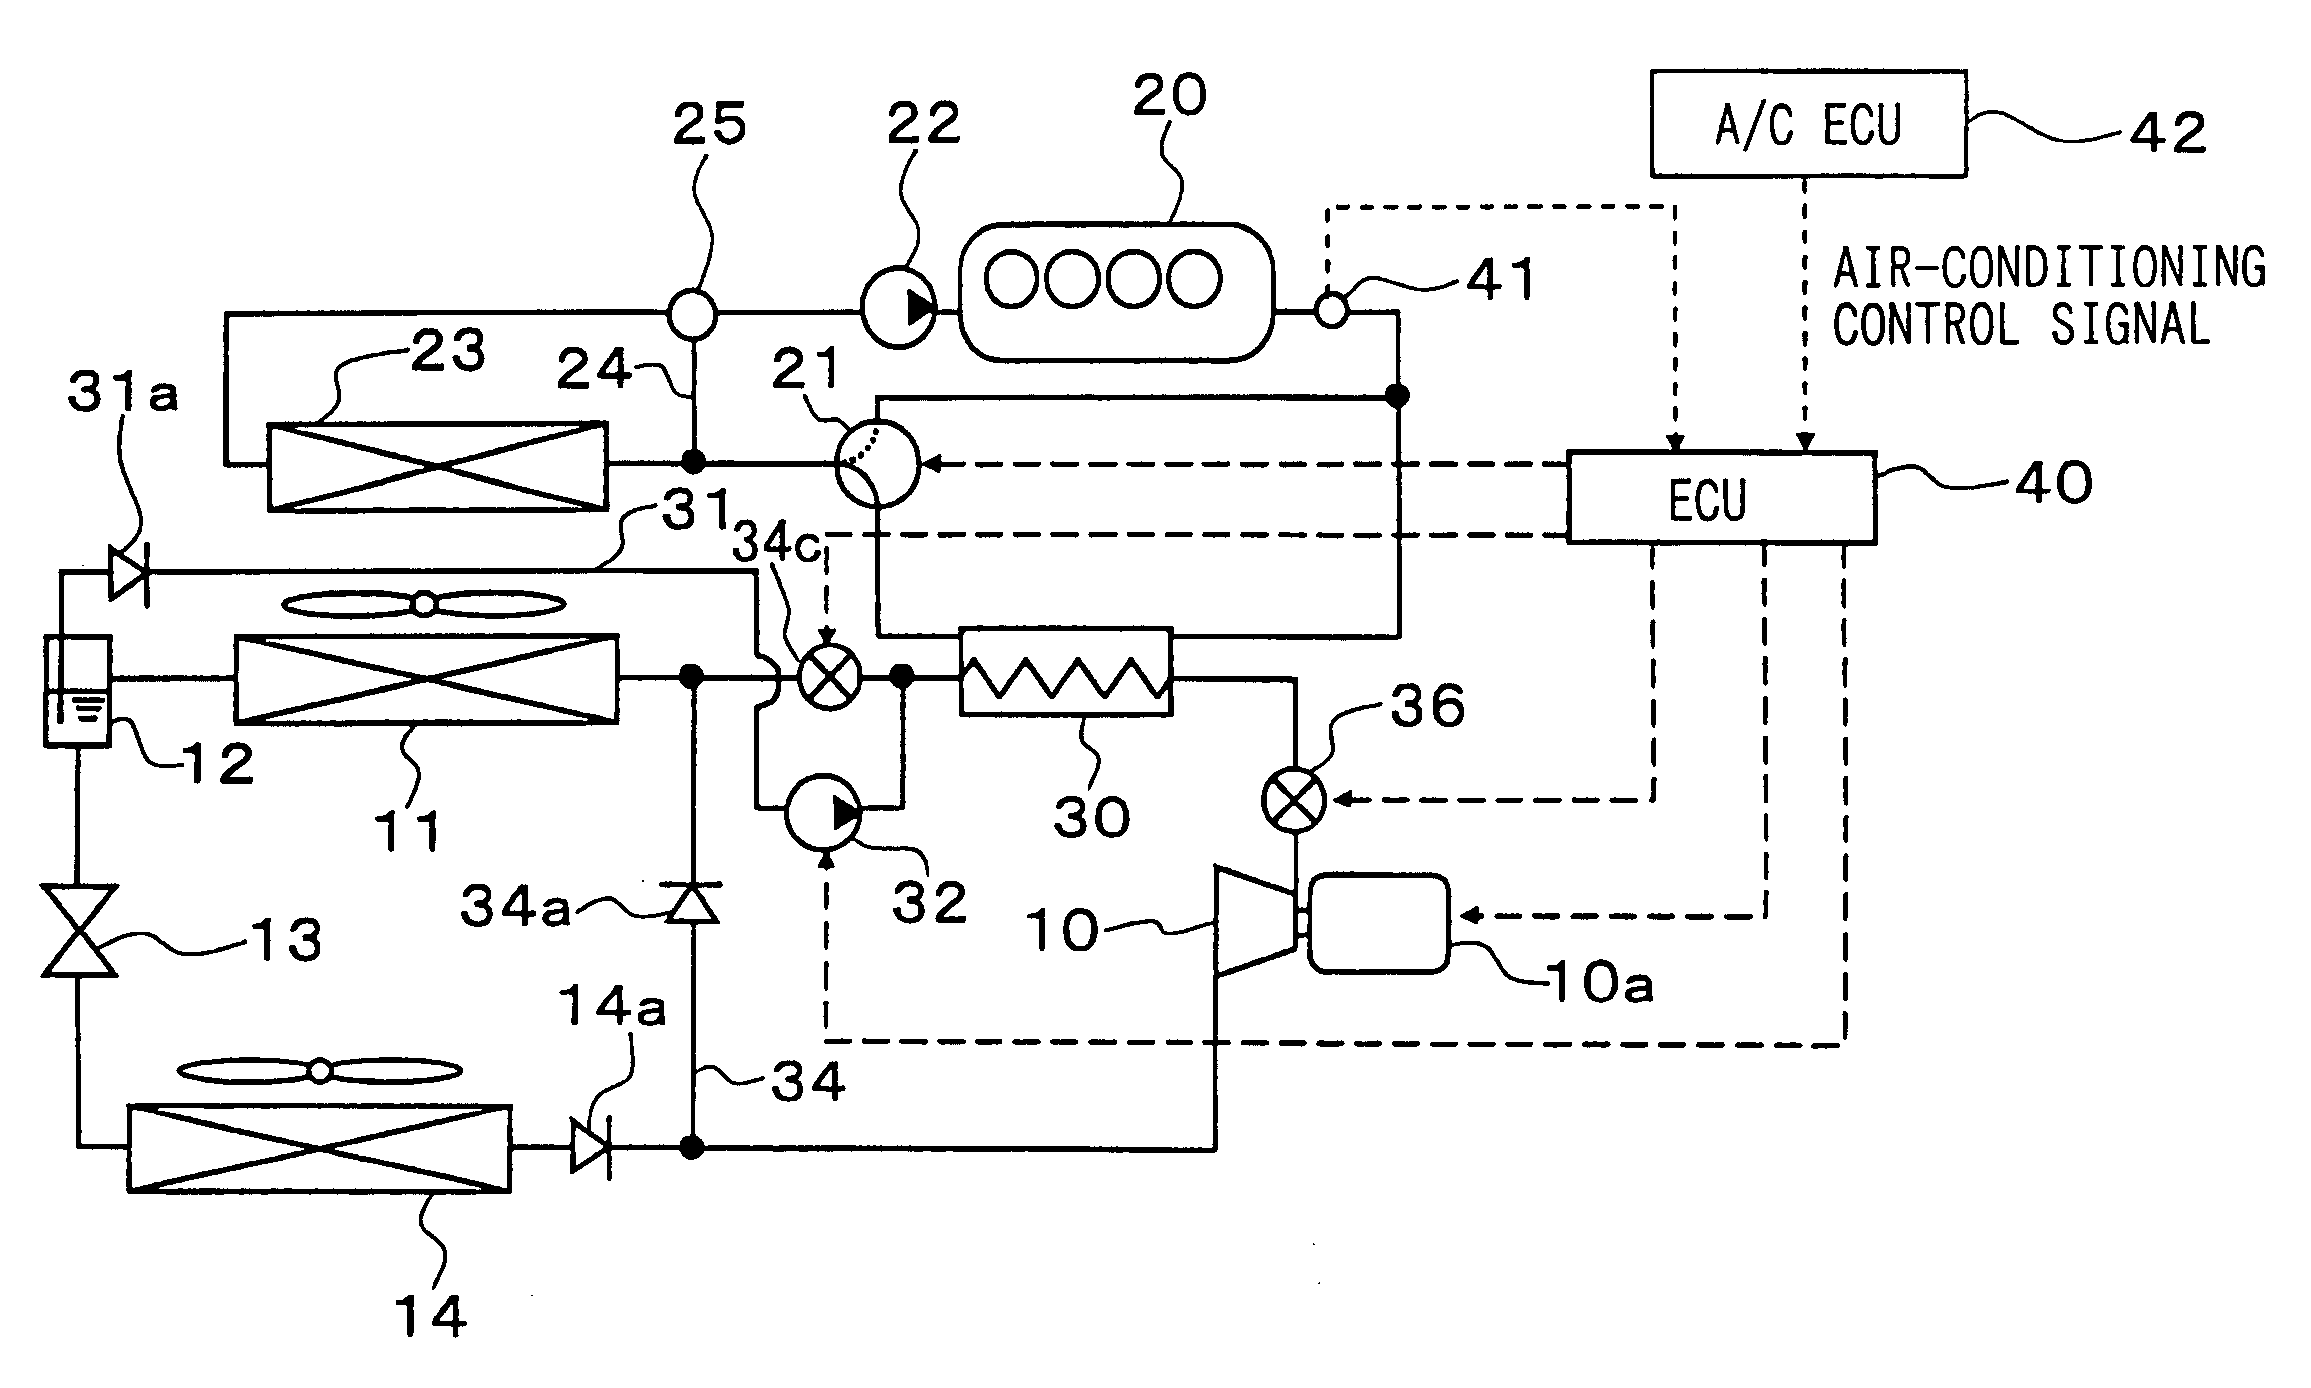 Waste heat collecting system having rankine cycle and heating cycle